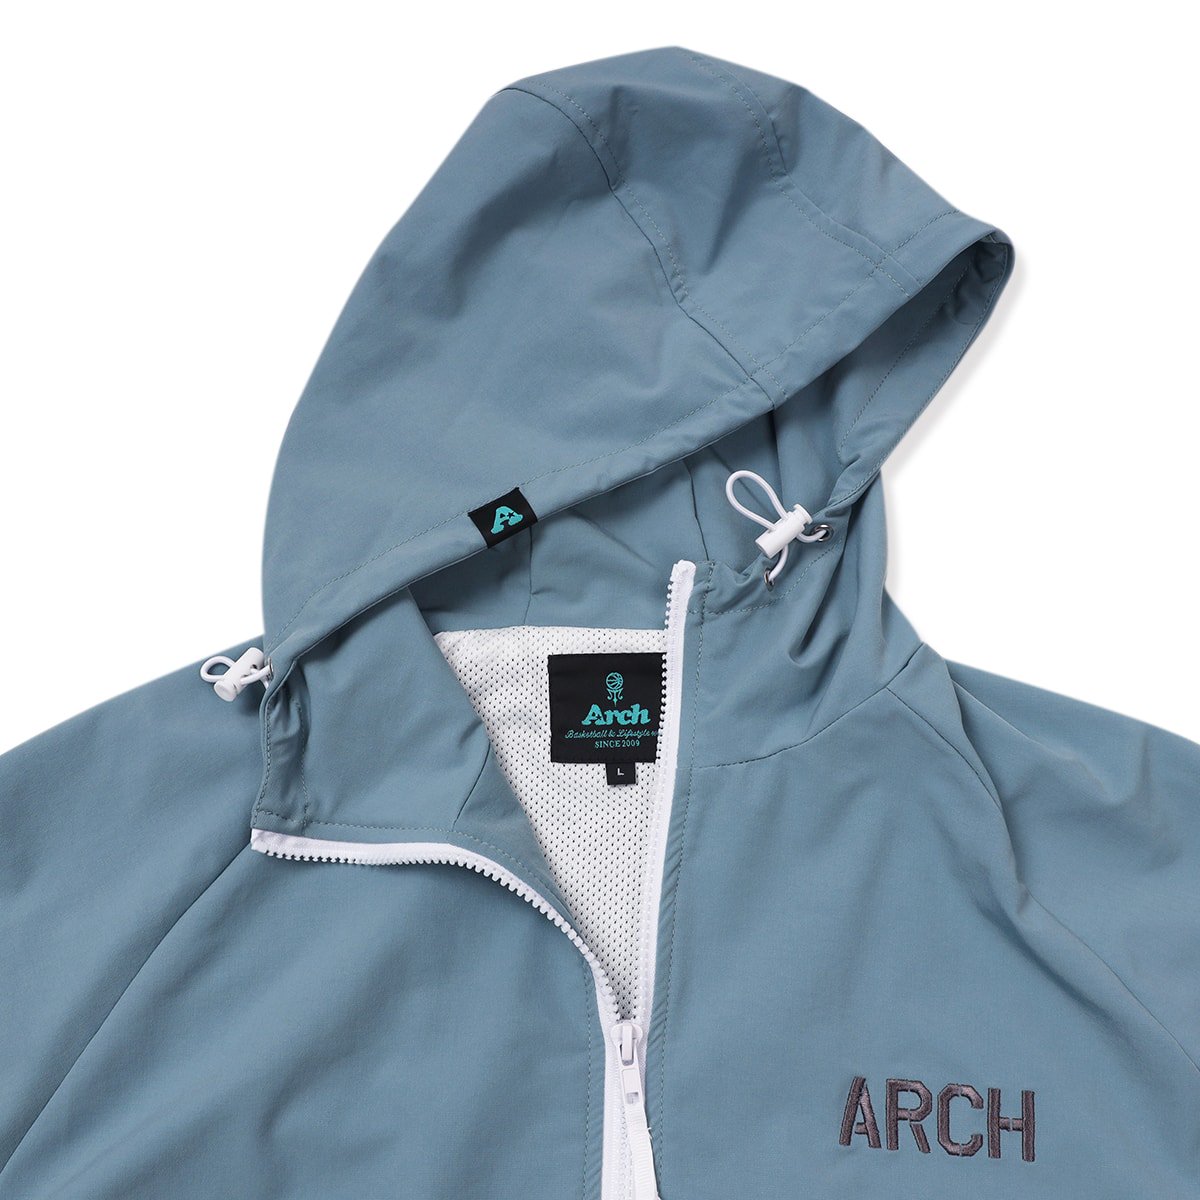 classic track jacket【stone blue】 - Arch ☆ アーチ 